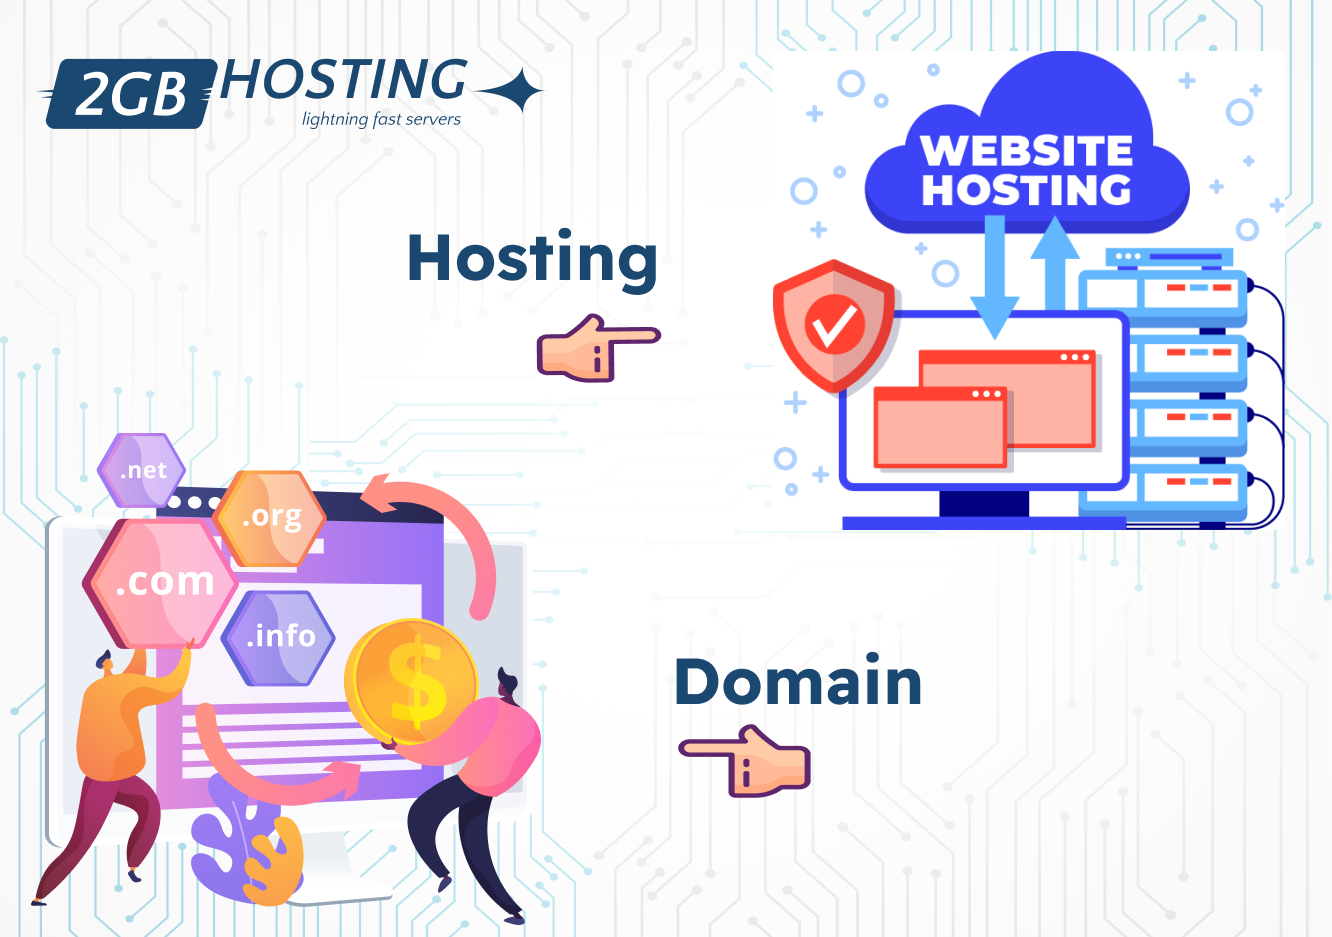 Domain and Web Hosting